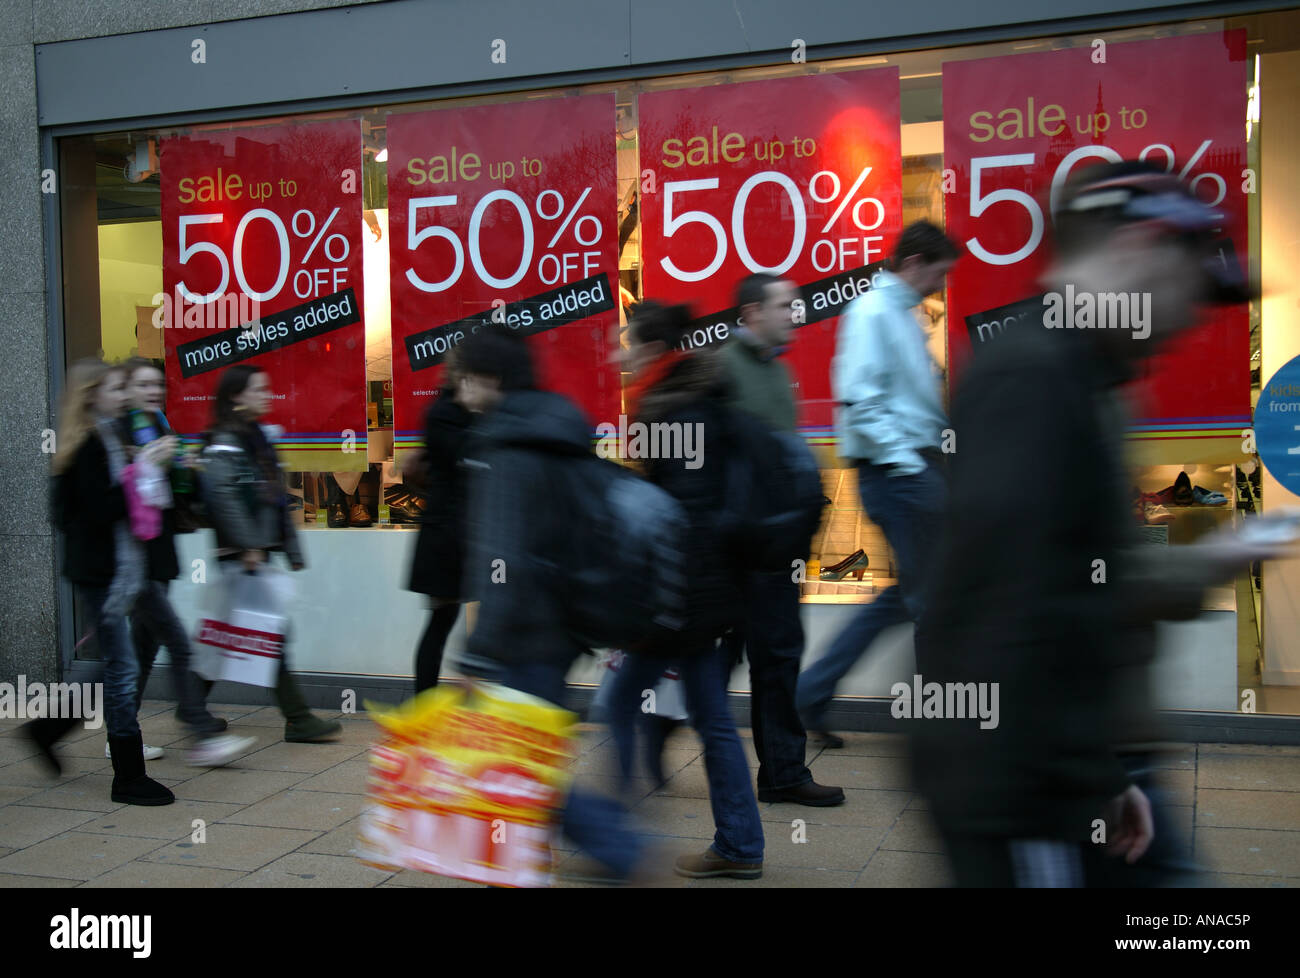 Shop window sale signs with passing blurred pedestrians in the foreground, Edinburgh, Scotland Stock Photo